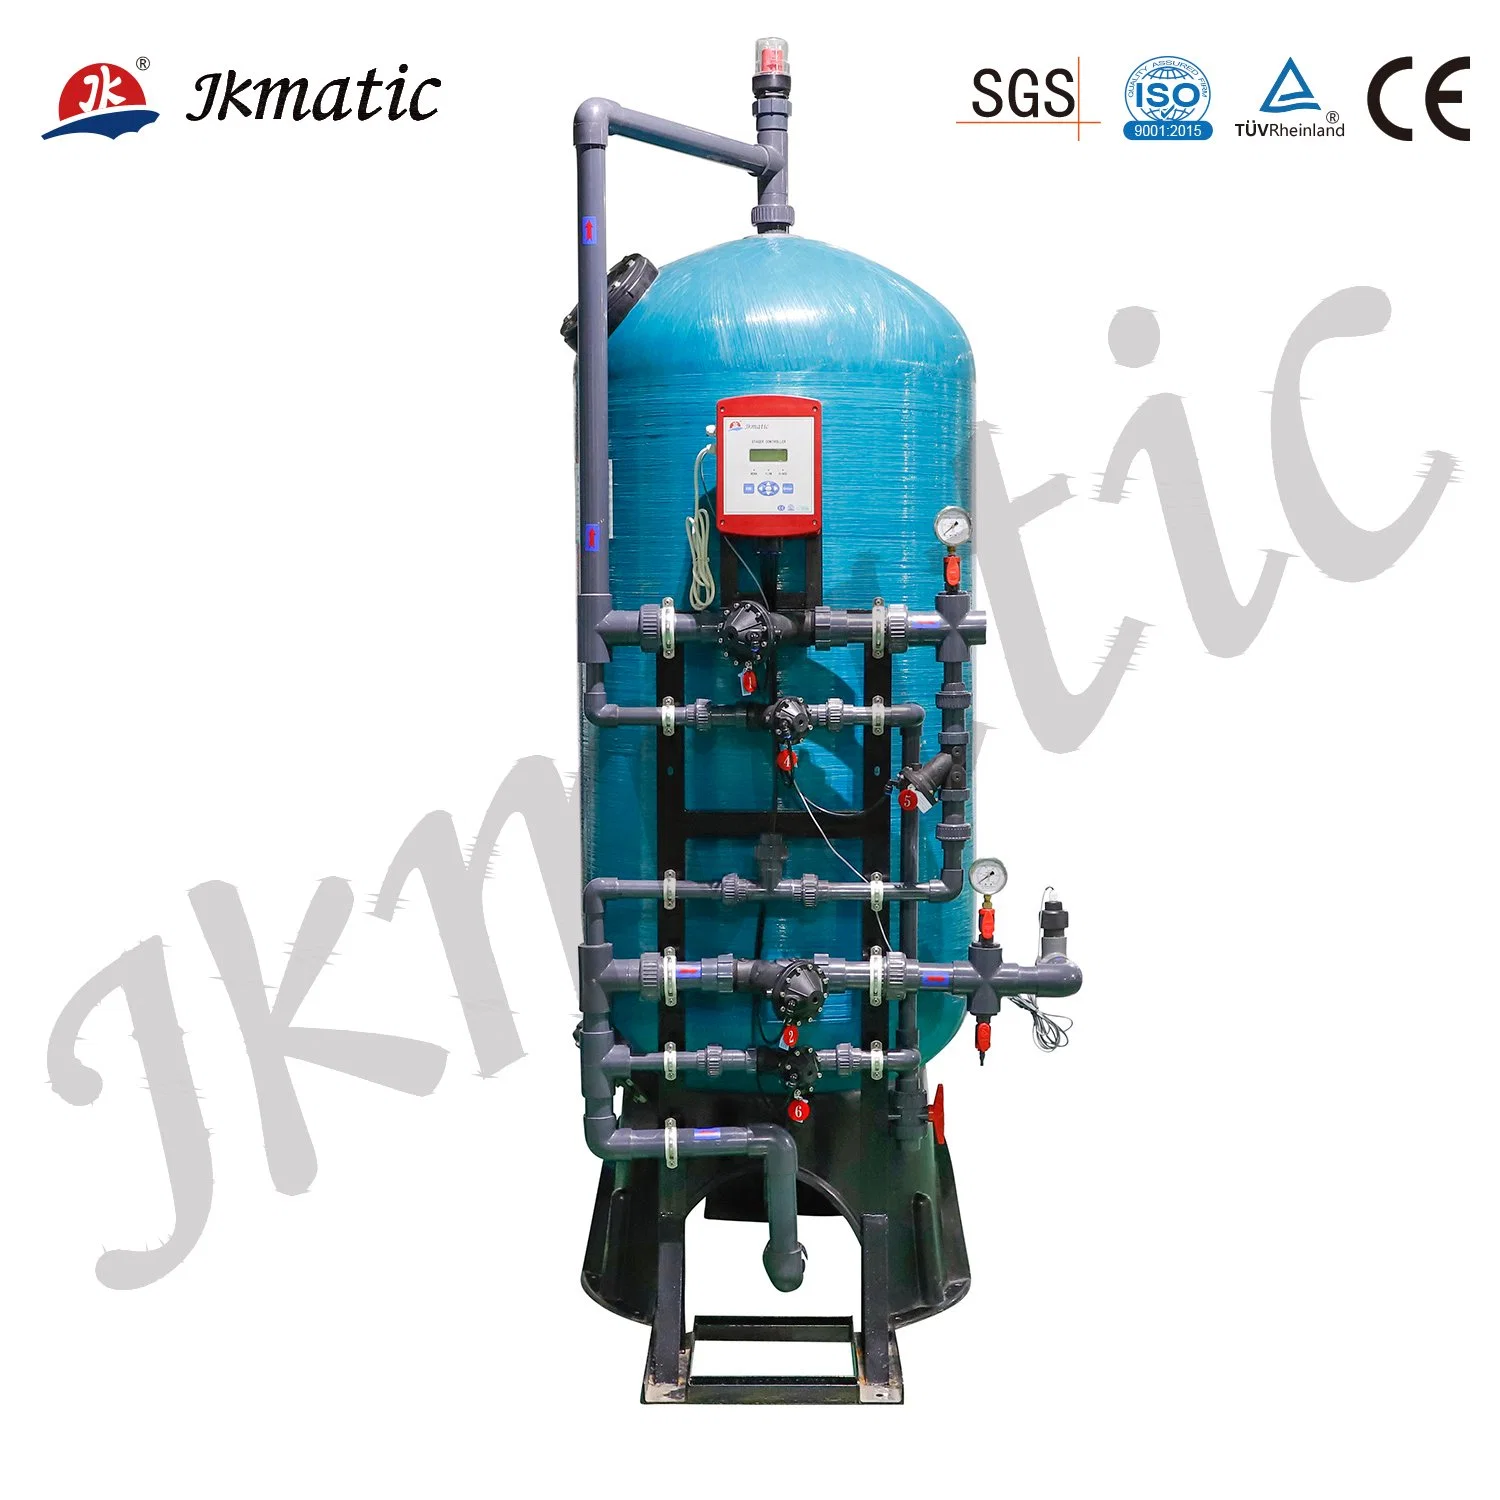 Automatic Water Softener / Softener Water System for Water Softener Treatment / Feed Water Heater